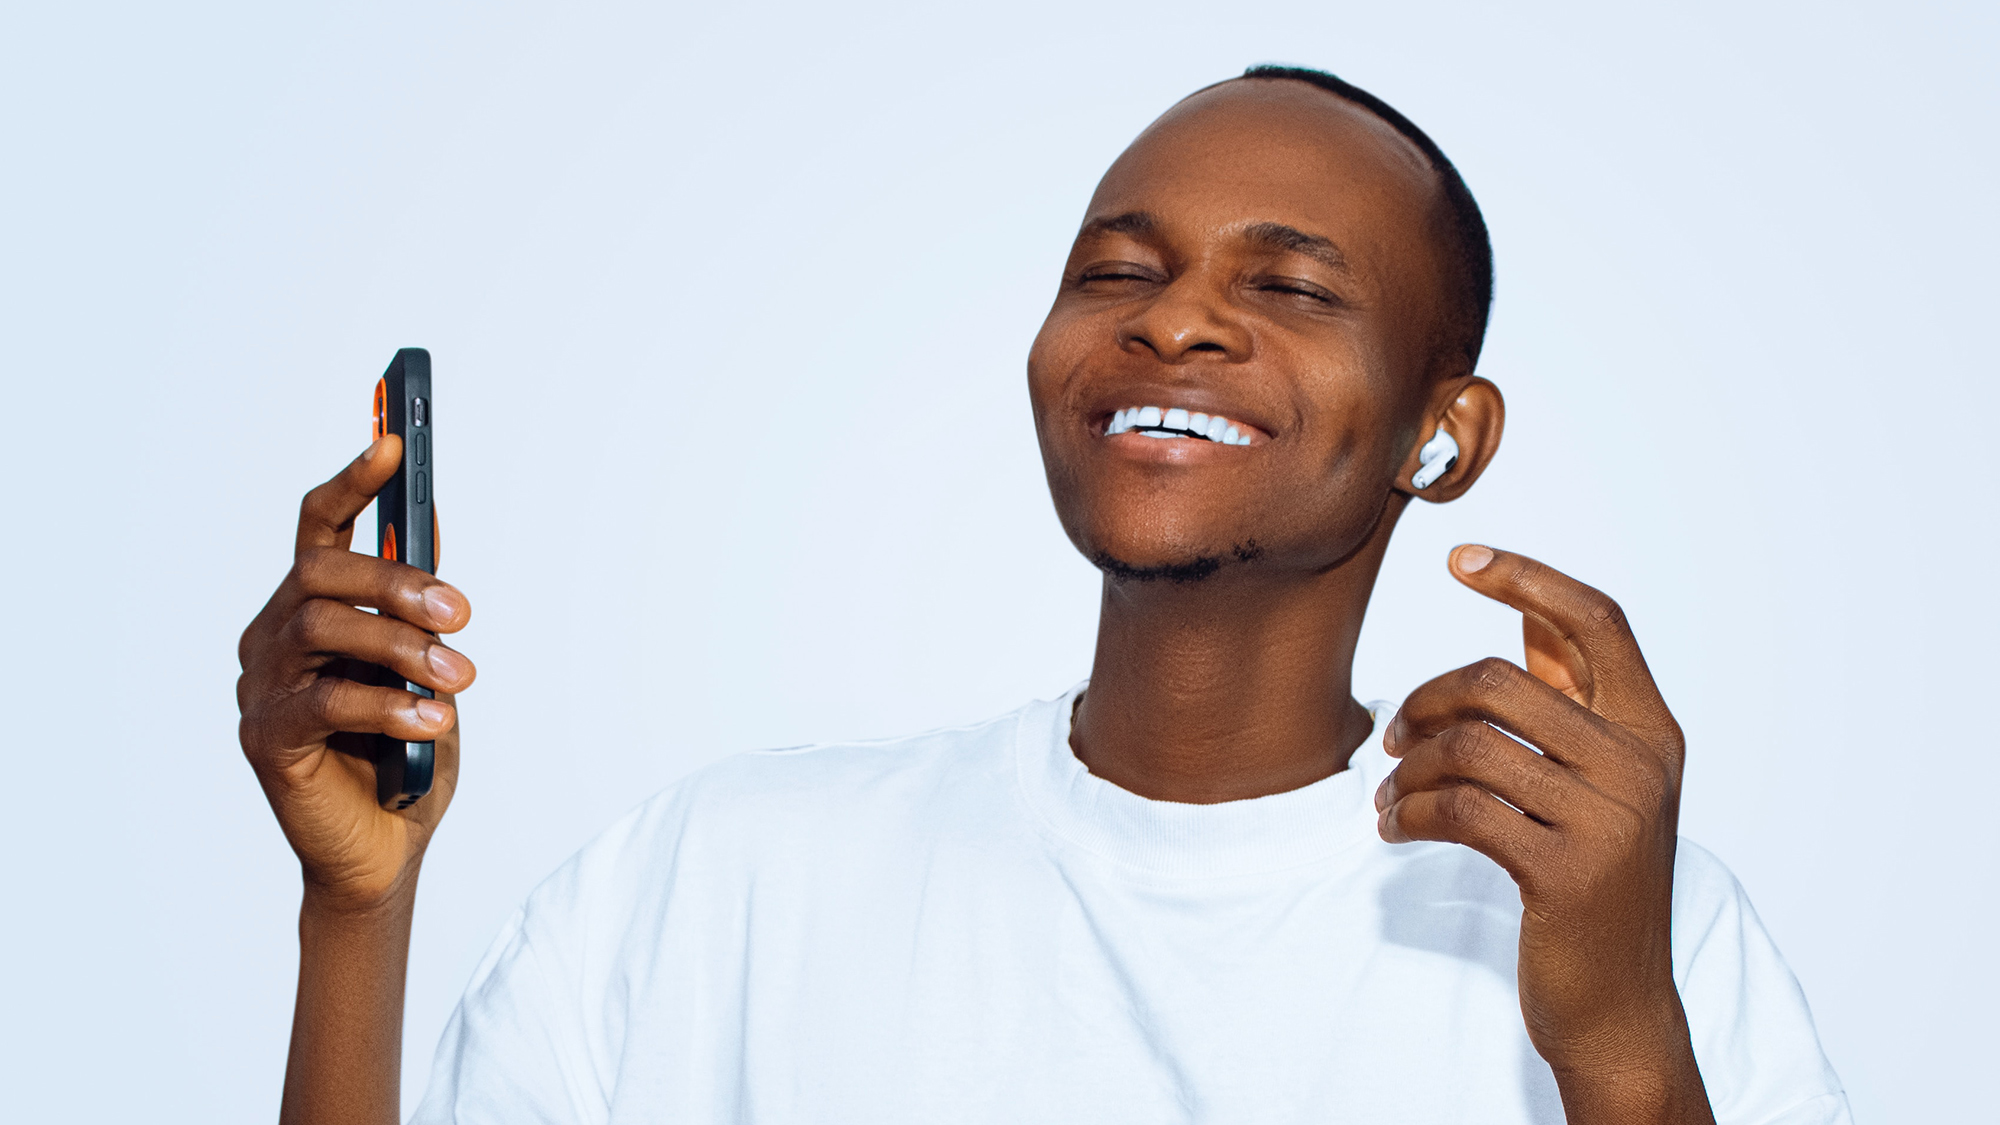 Seemingly happy person listening to music on earbuds